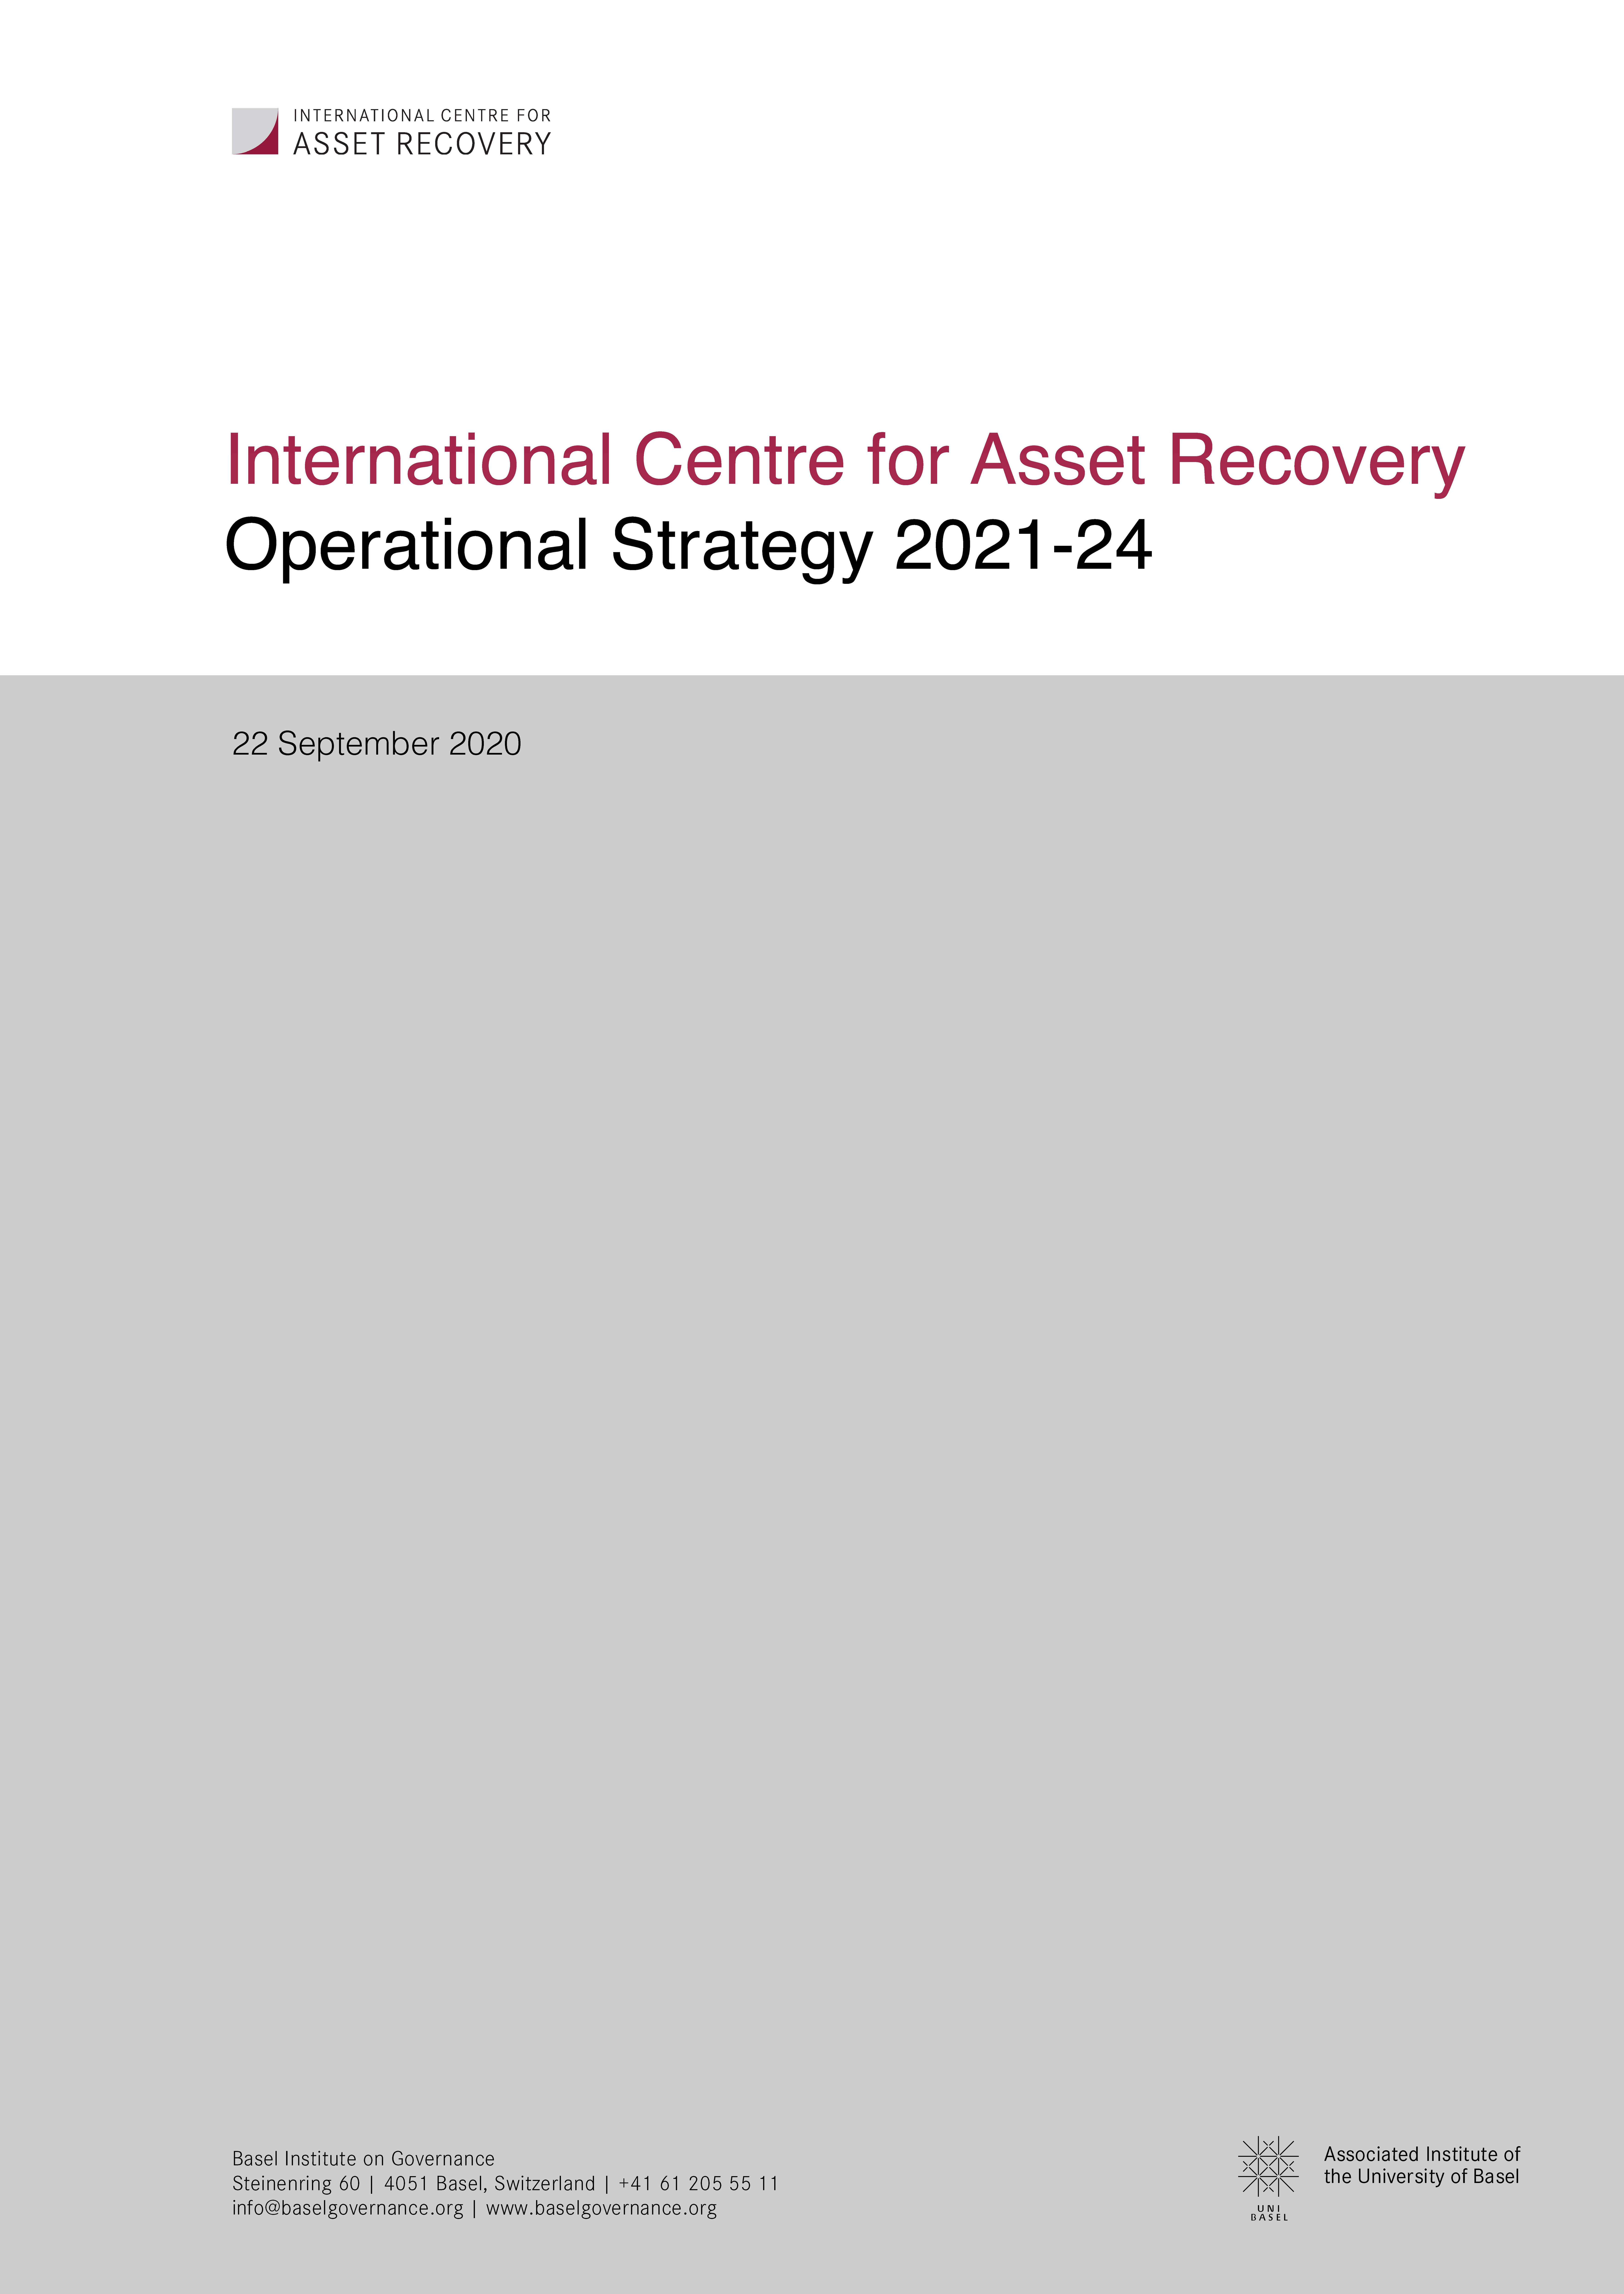 ICAR operational strategy 2021-24 cover page